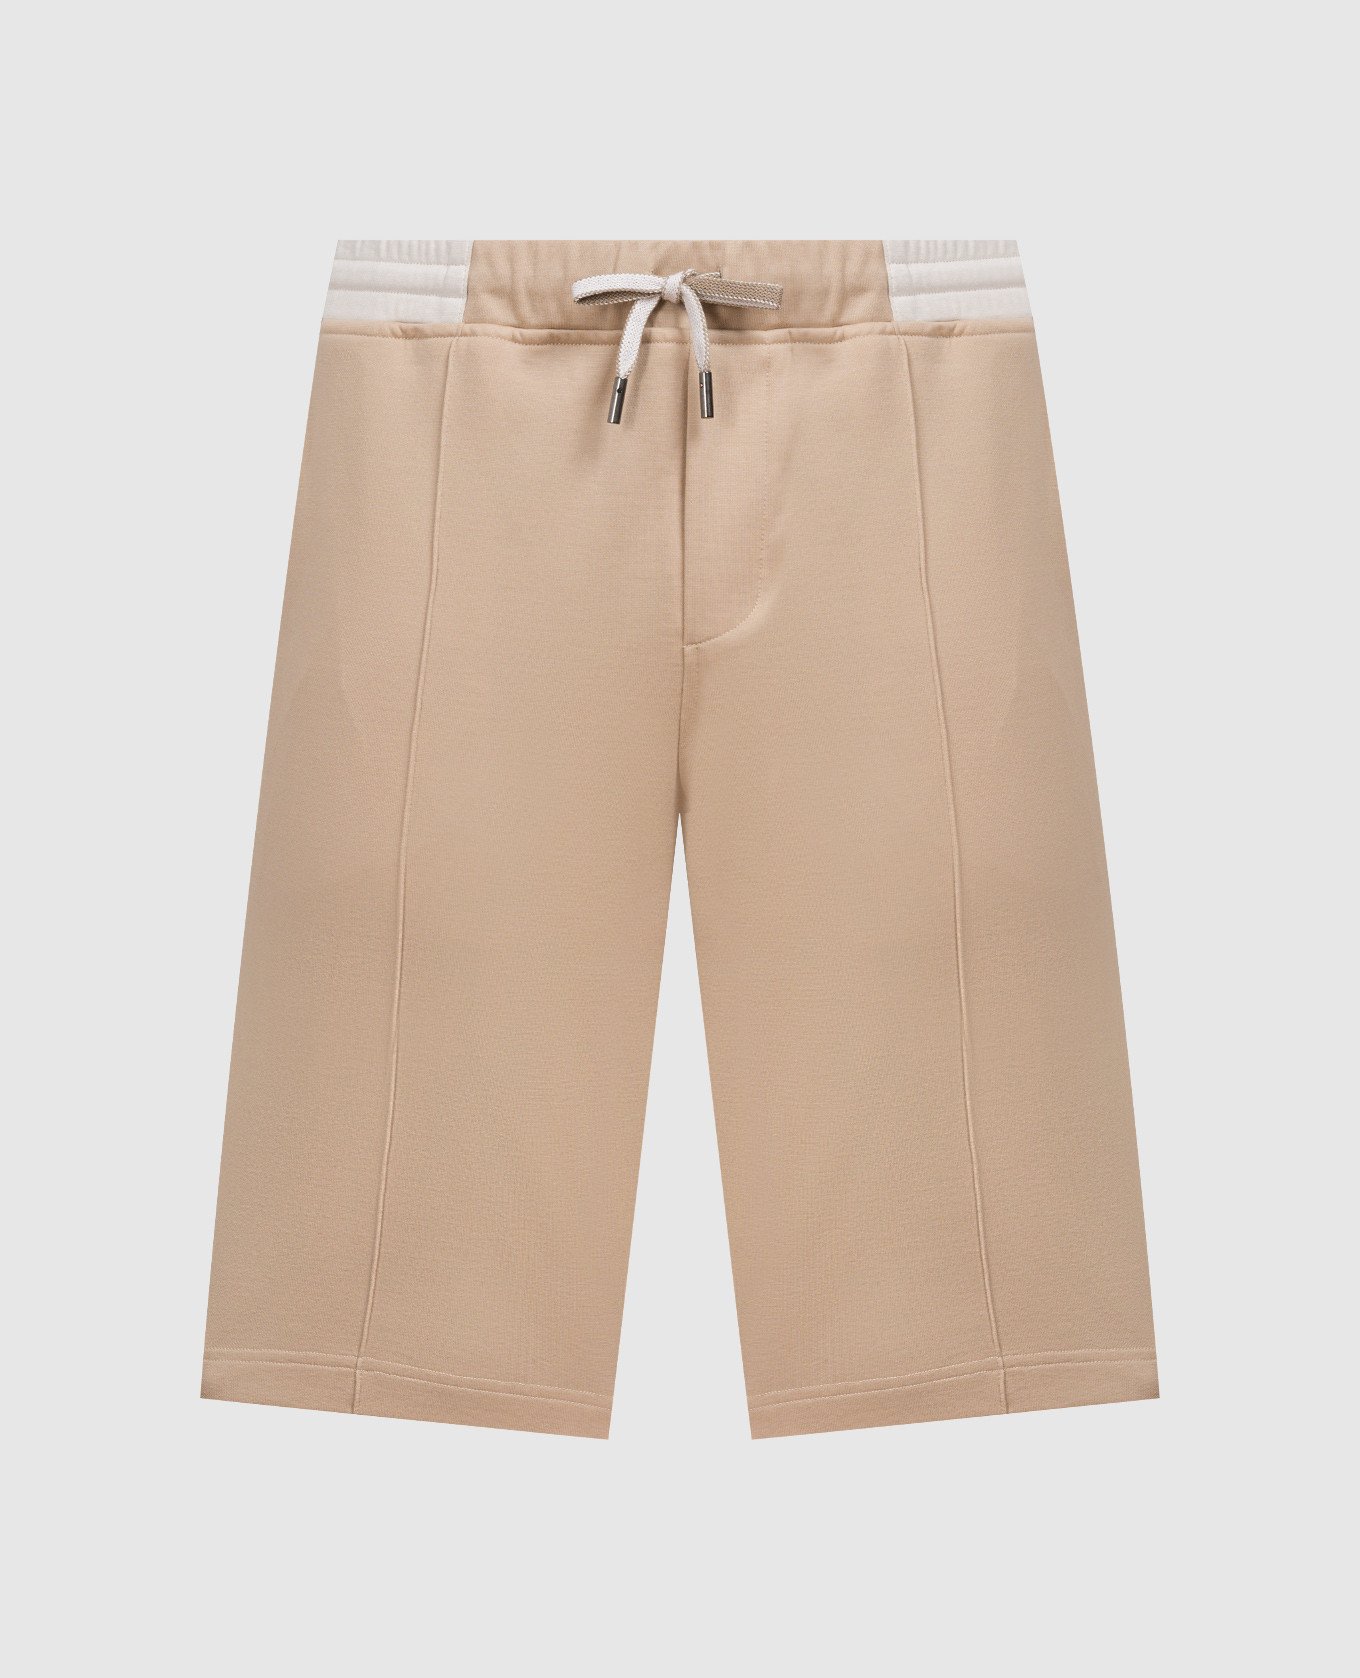 Beige shorts with logo patch